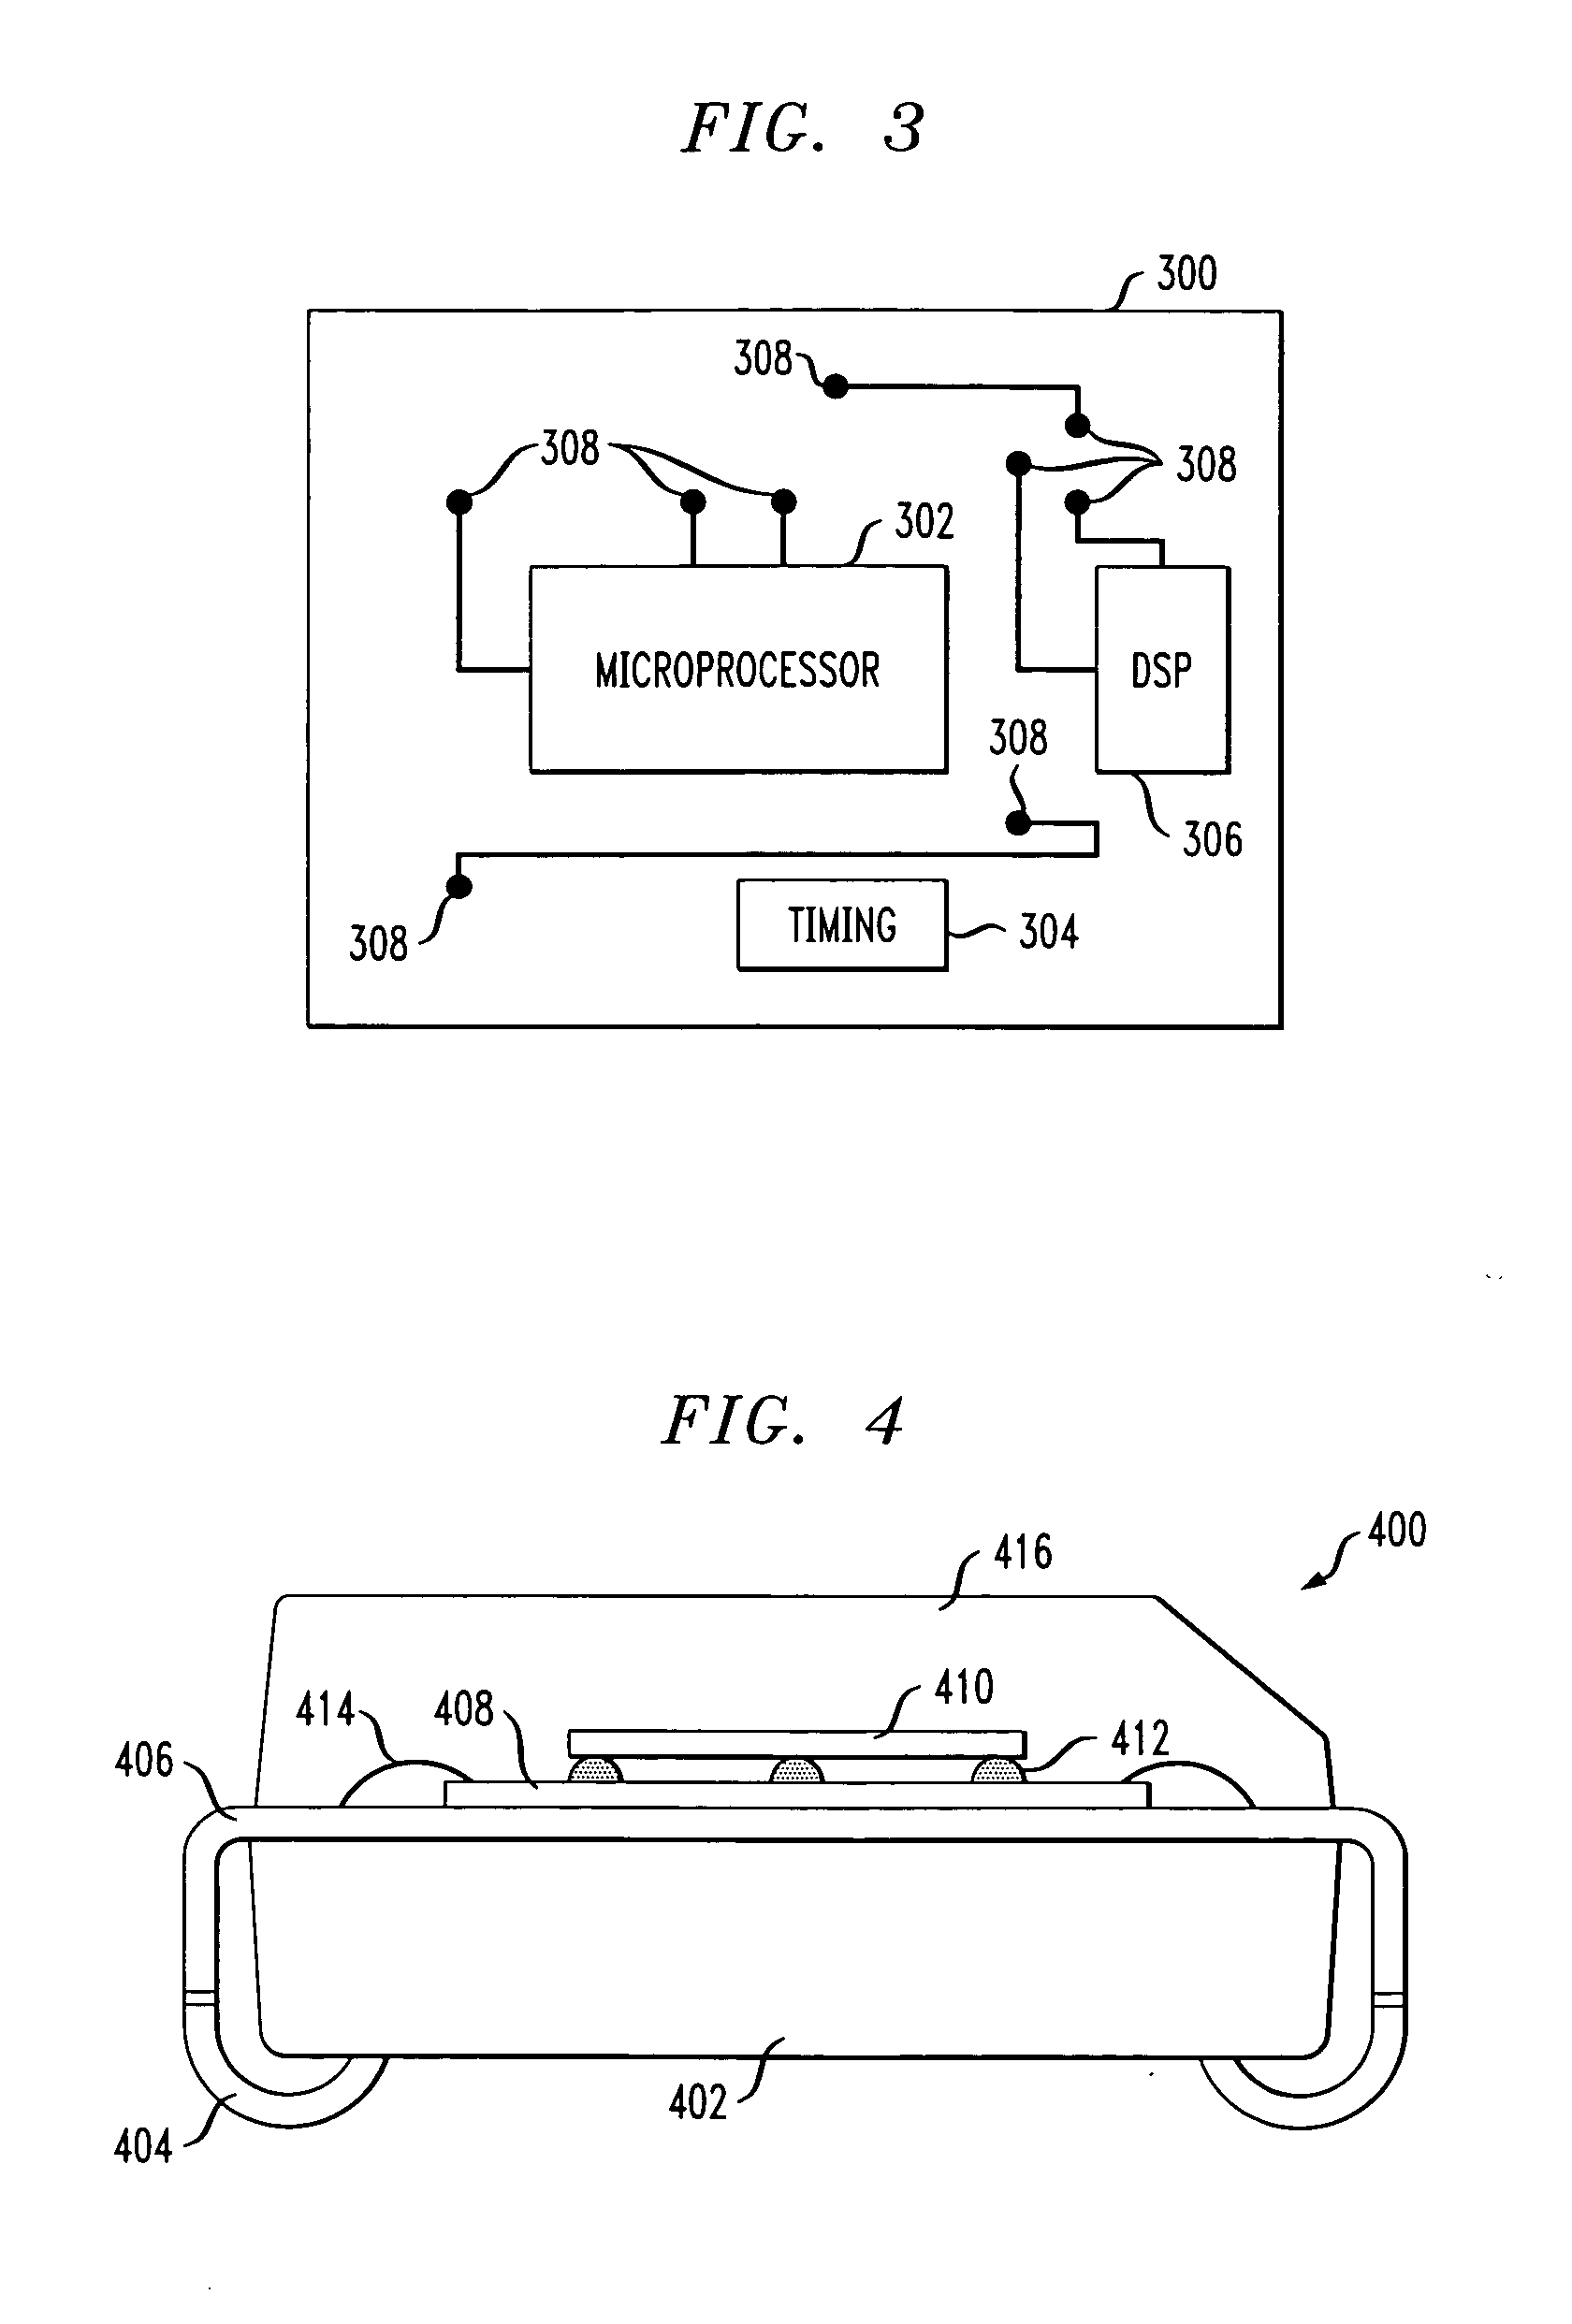 Integrated circuit architecture for reducing interconnect parasitics